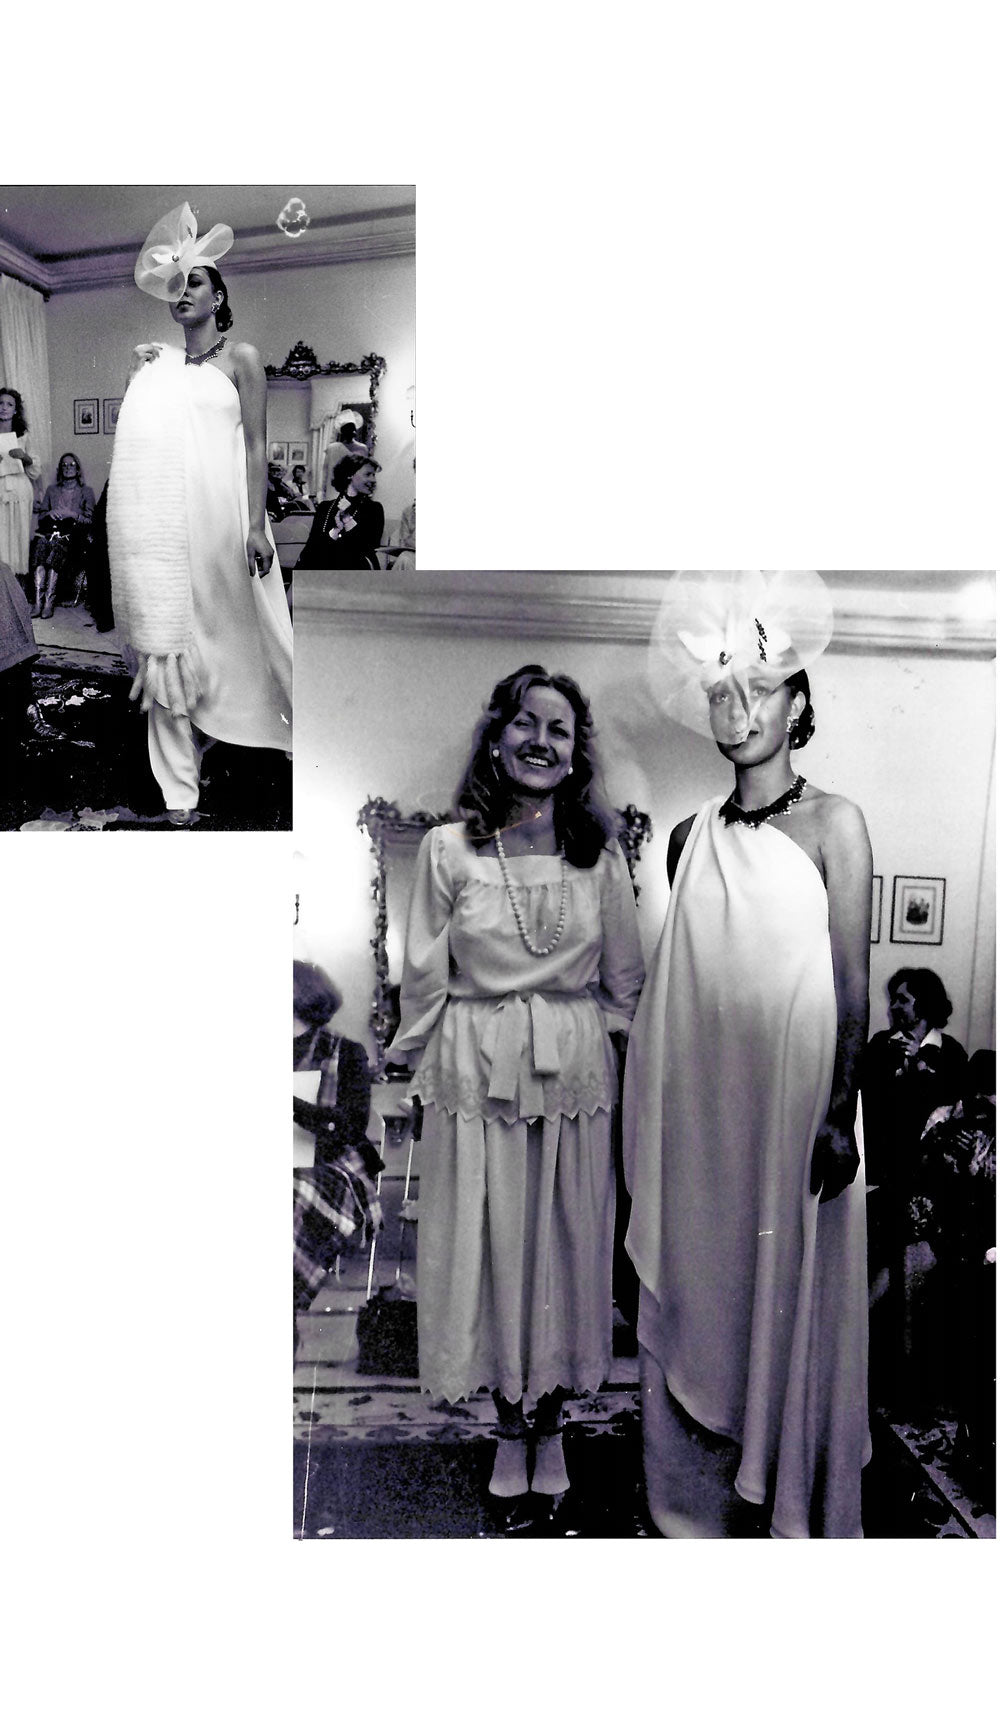 Fashion designer Helga Okan, founder of PIO O'KAN, next to model, dressed in Helga Kienel Couture, the designer's couture/fashion brand at the time in the late 1970s/early 1980s.